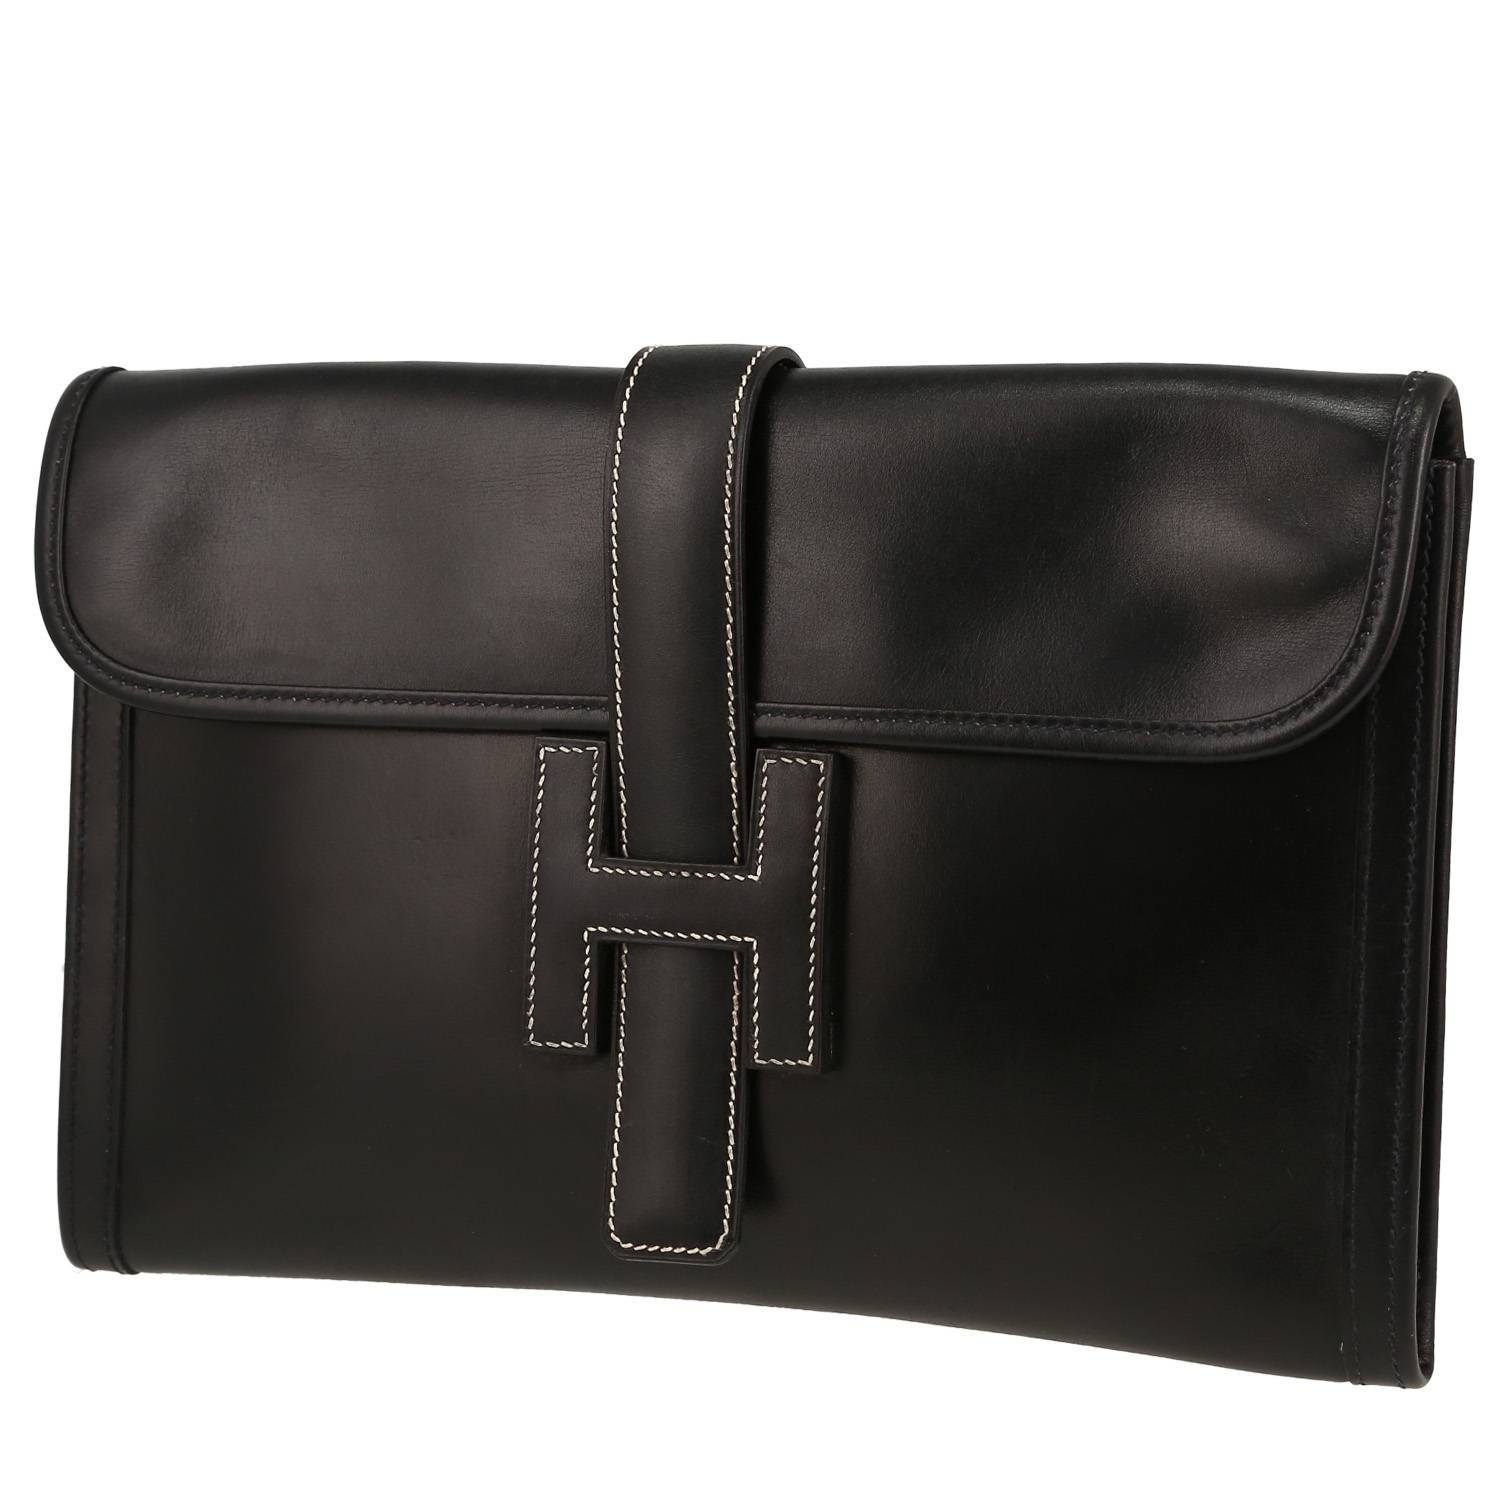 Jige Pouch In Black Box Leather